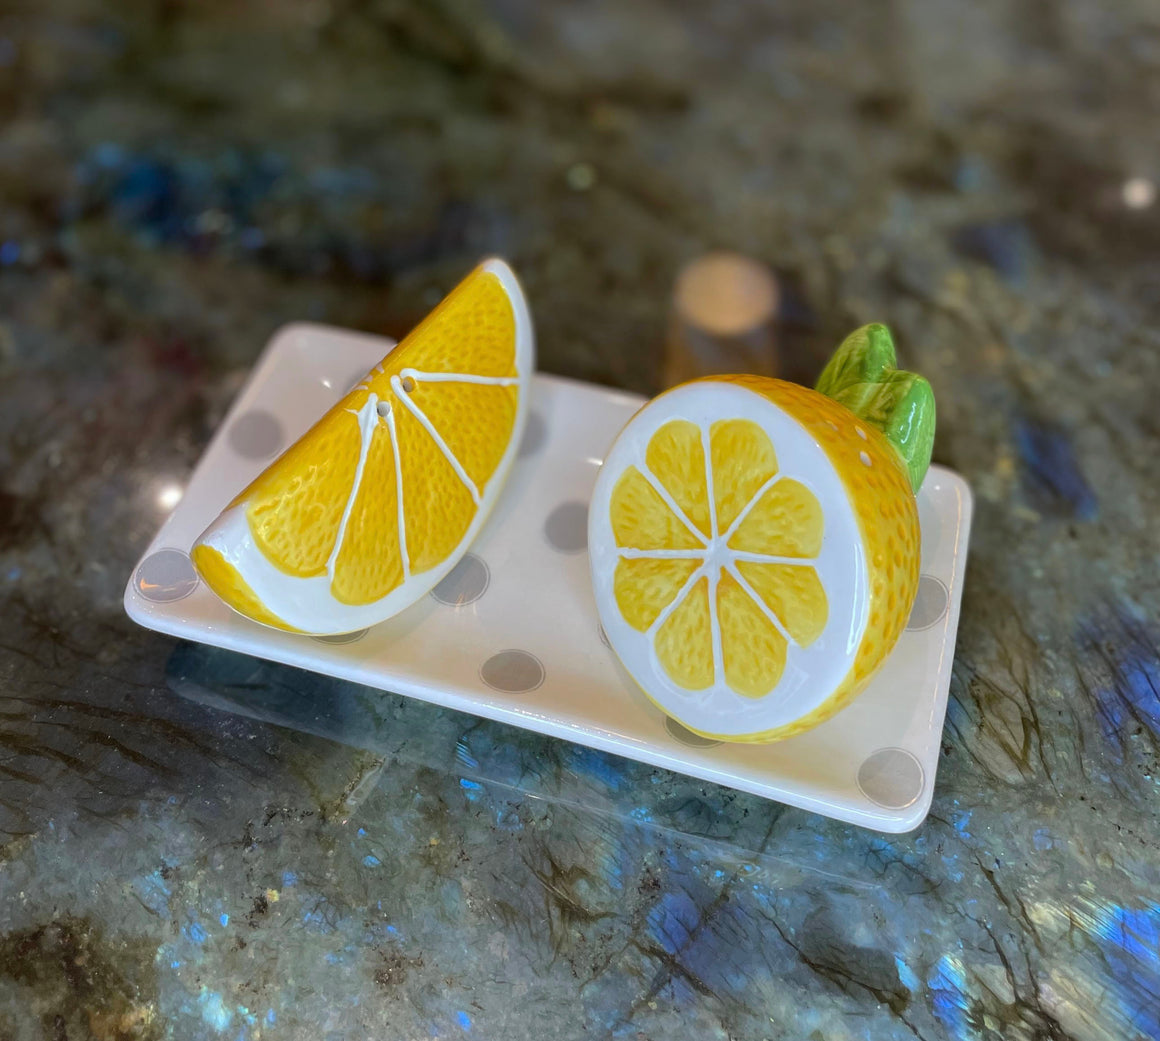 Ceramic Lemons Salt and Pepper Shaker Set, Polka Dot Tray with Lemon Slices, Salt and Pepper Shaker Set of 3, White, Yellow and Grey, 6 Inches x 3 Inches